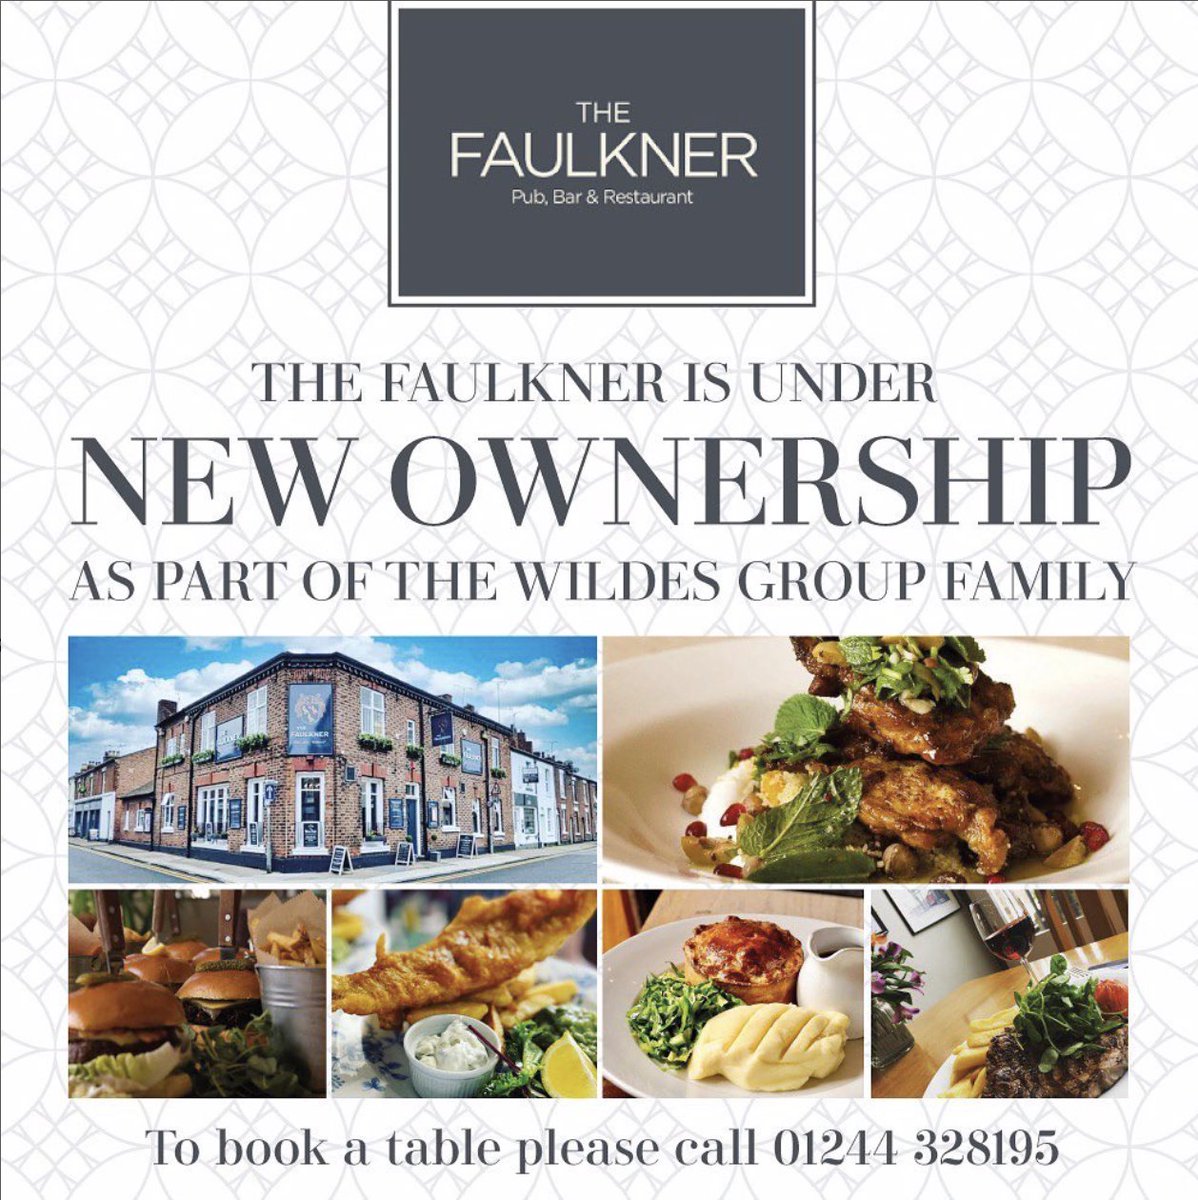 We are pleased to announce the acquisition of The Faulkner Pub, Bar and Restaurant into our family. We can’t wait to meet you. #Newownership #Hoole #Chester #Cheshirelife #Chesterlife #Cheshirelifestyle #Wildesgroup